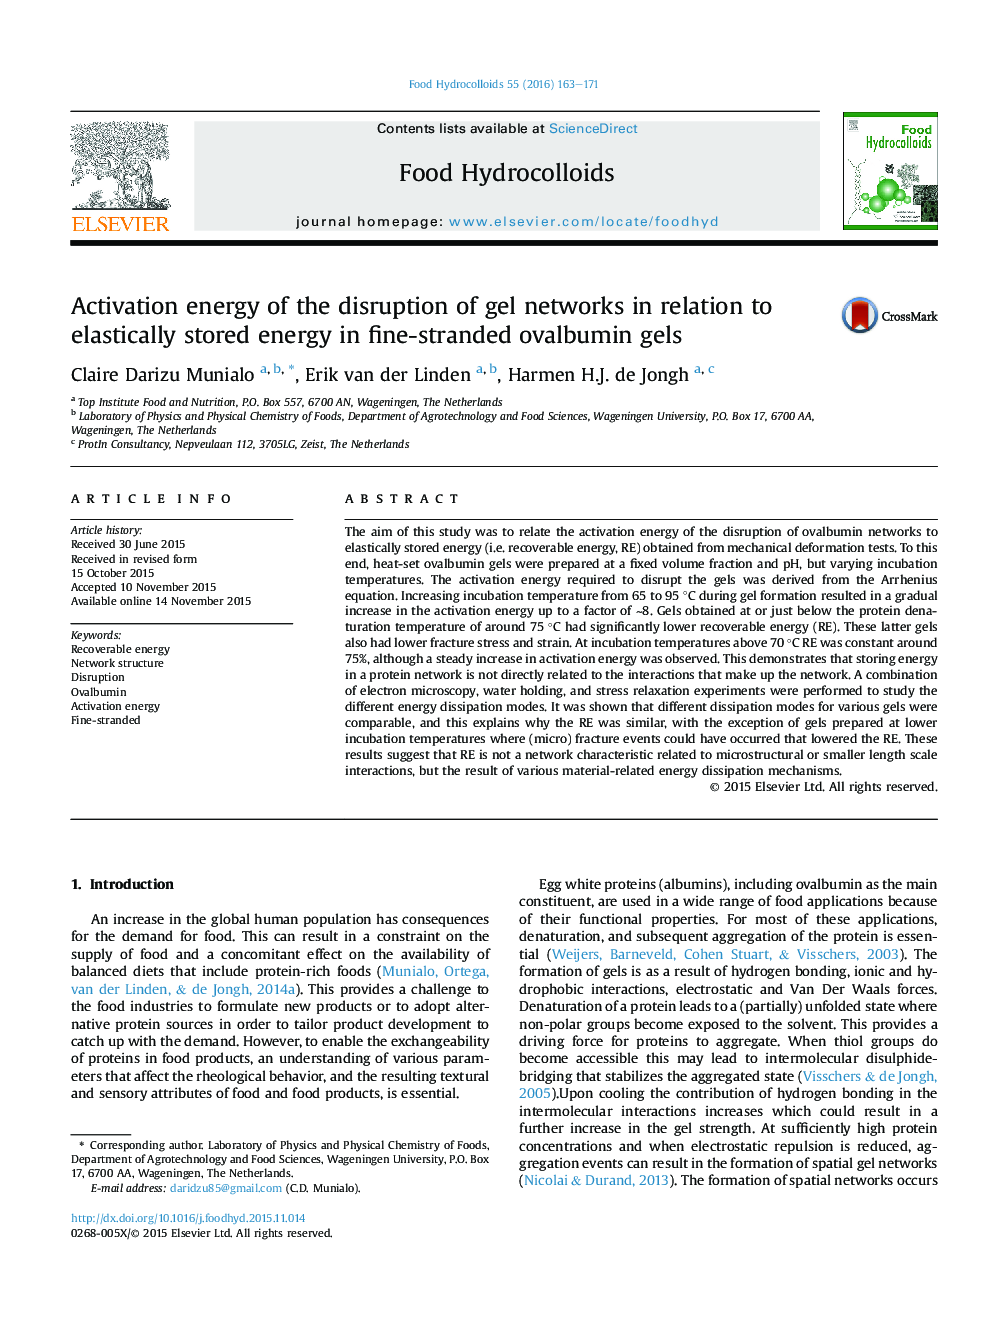 Activation energy of the disruption of gel networks in relation to elastically stored energy in fine-stranded ovalbumin gels